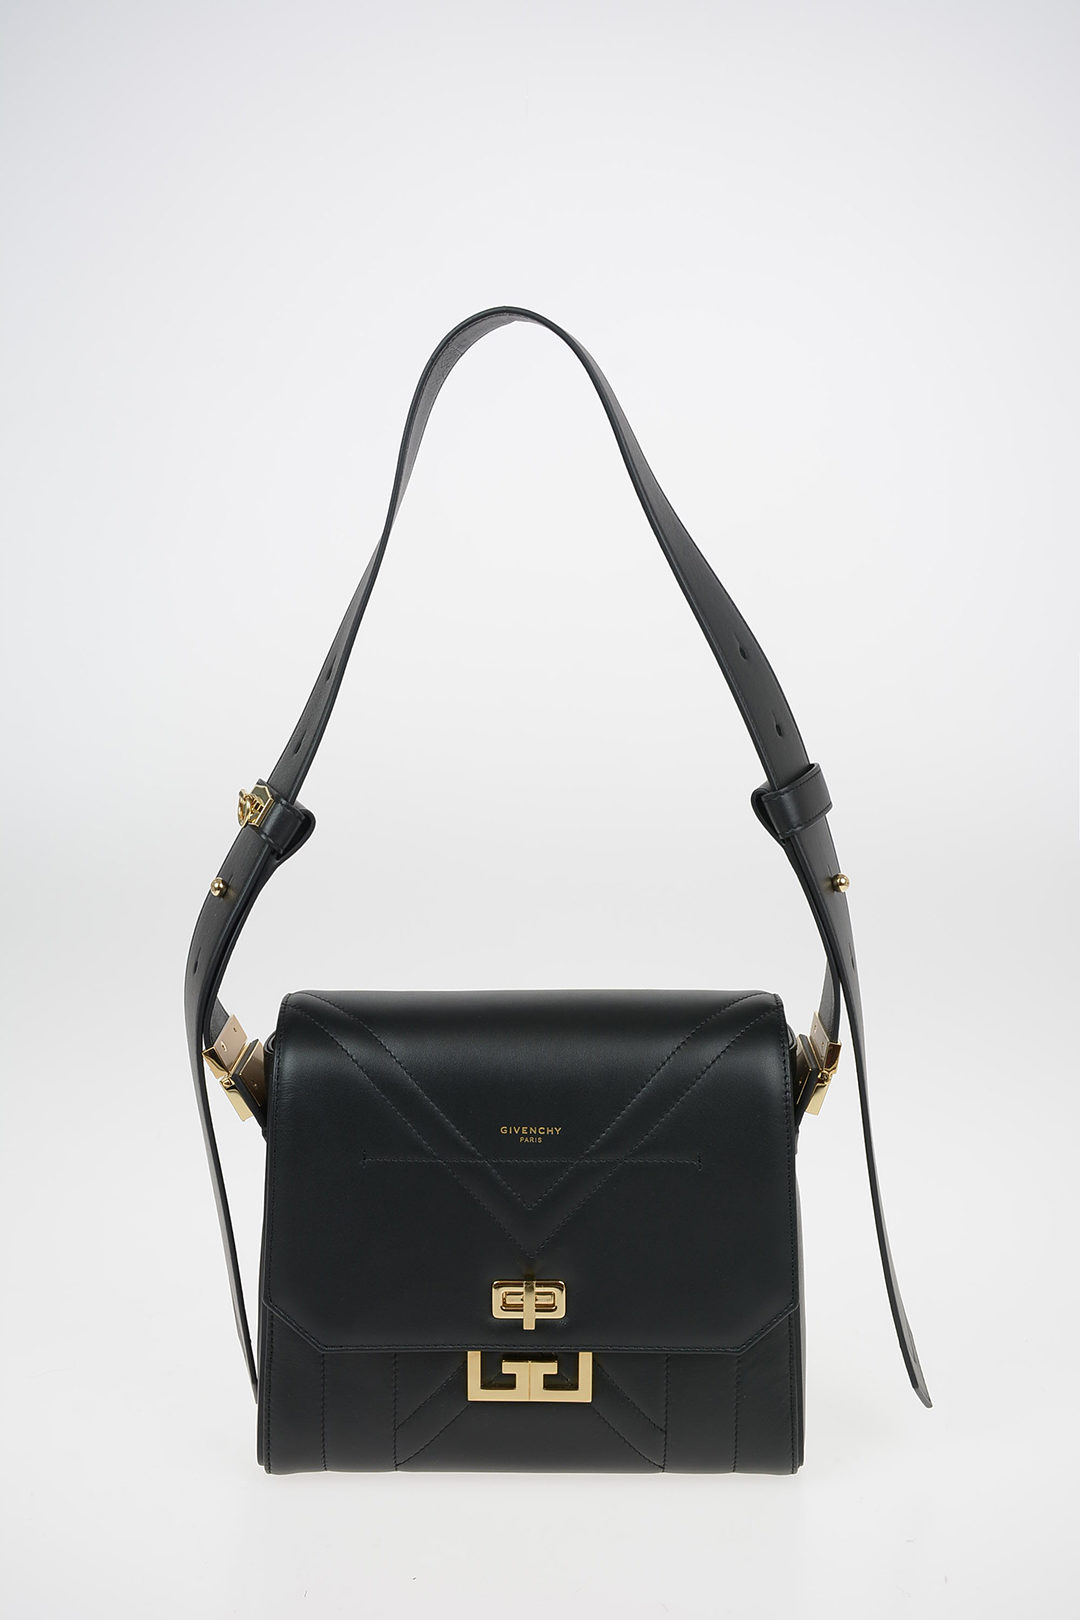 Eden leather crossbody bag Givenchy Black in Leather - 10492229